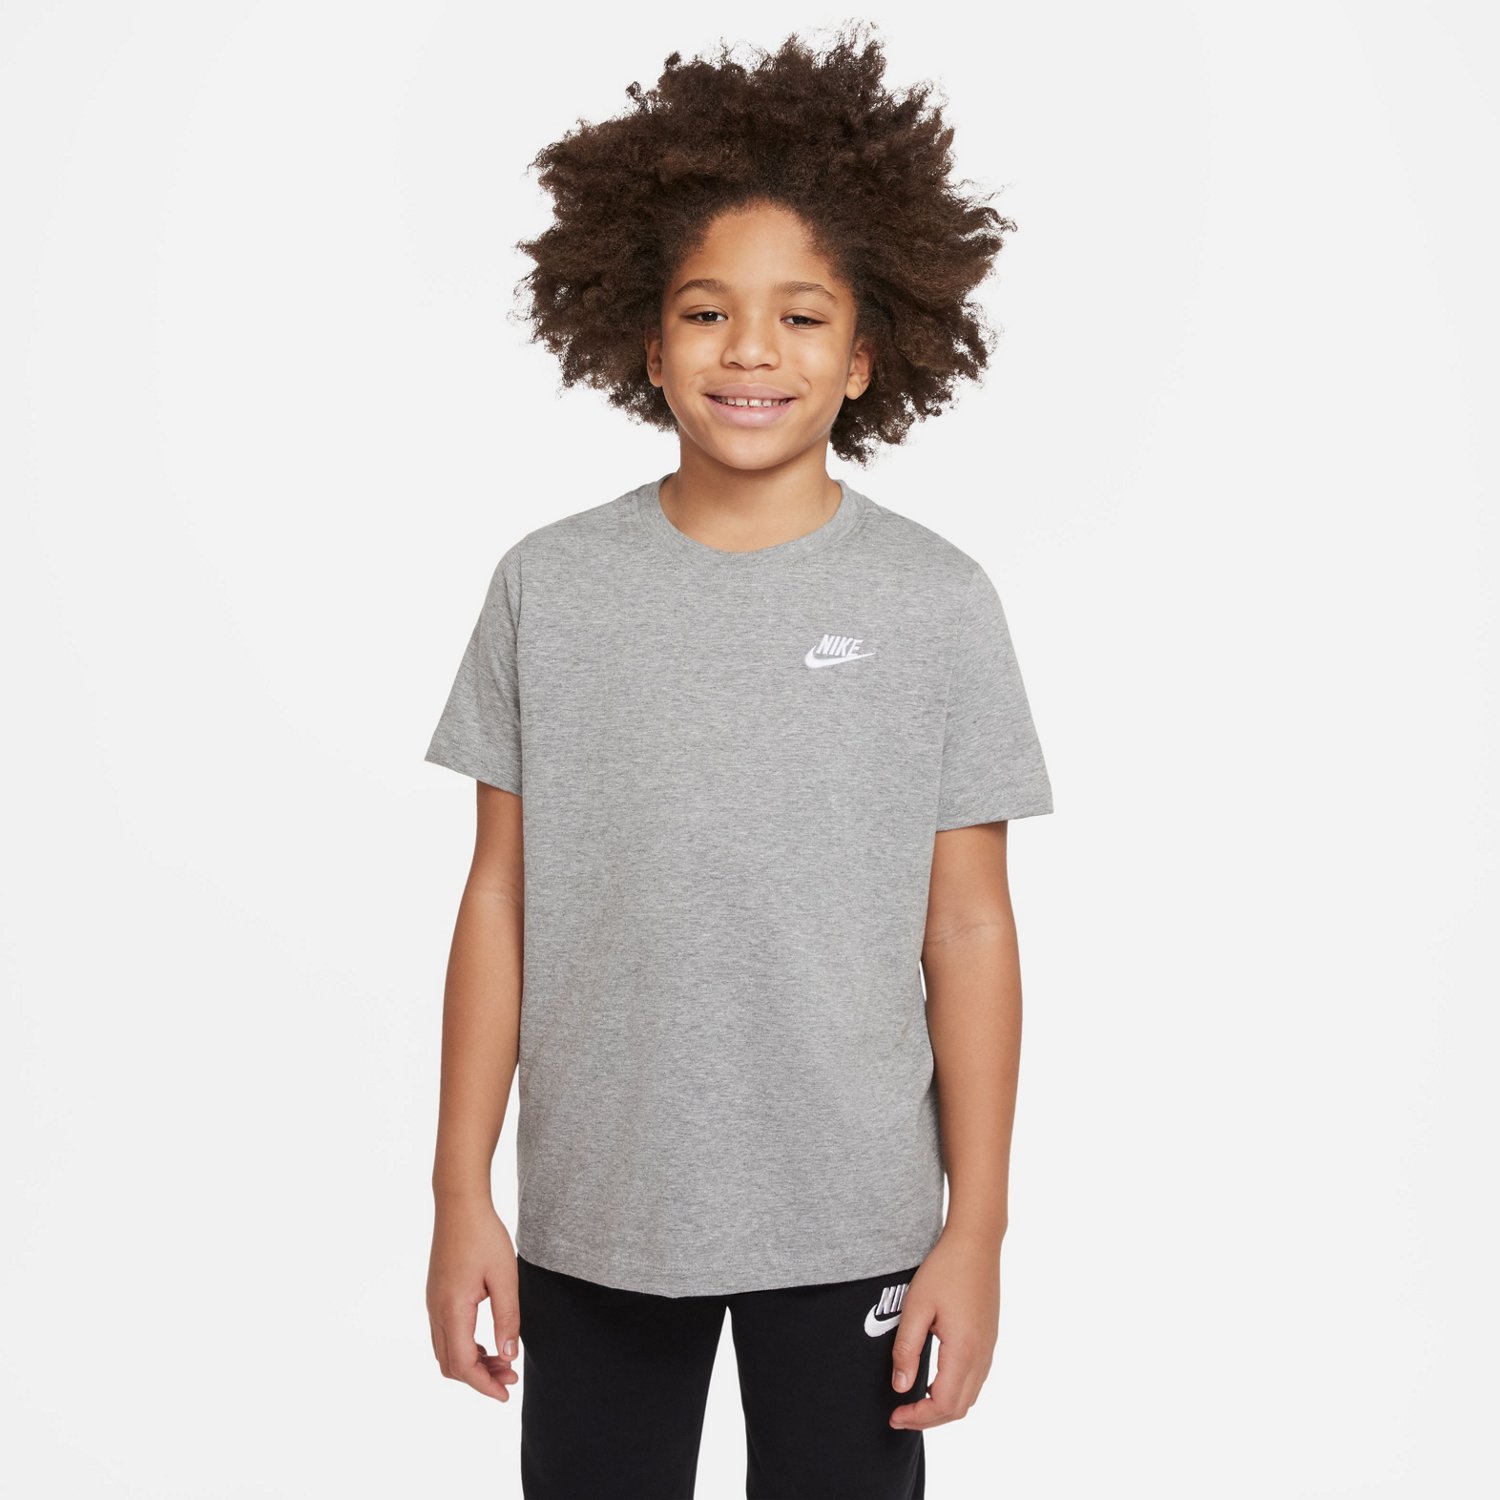 Nike Clothes For Kids: Buy Girls & Boys Nike Clothes In India – Rookie USA